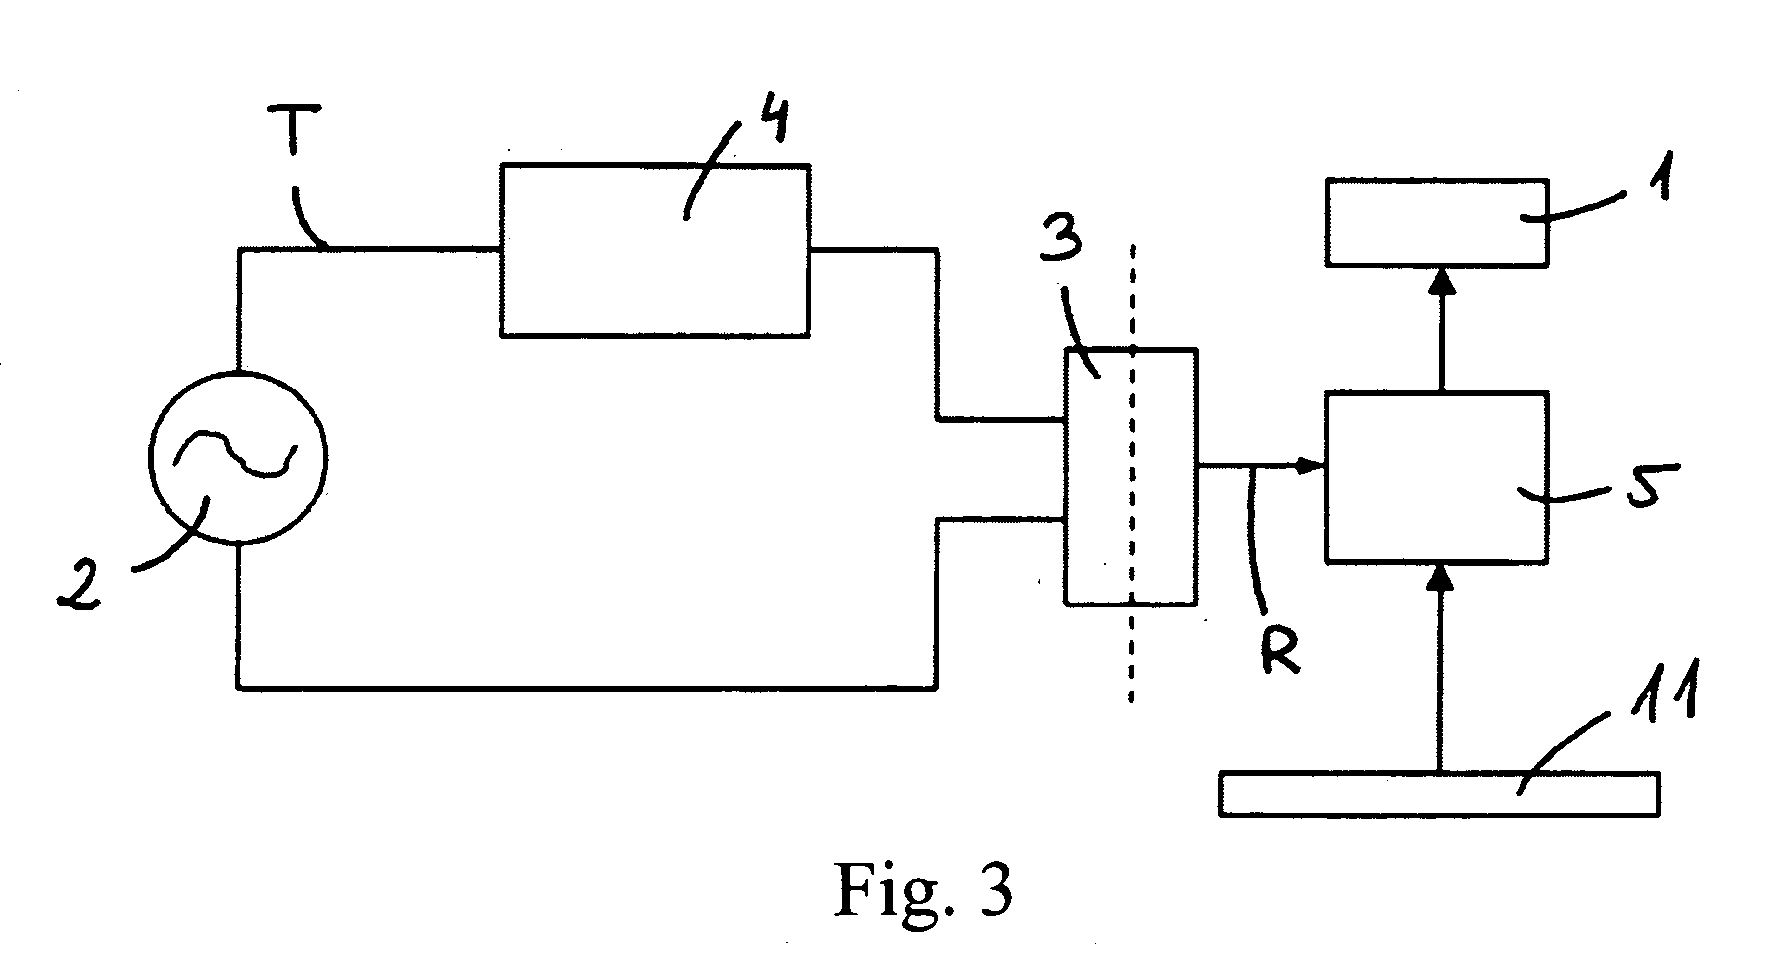 System for determining the nominal voltage of a power supply